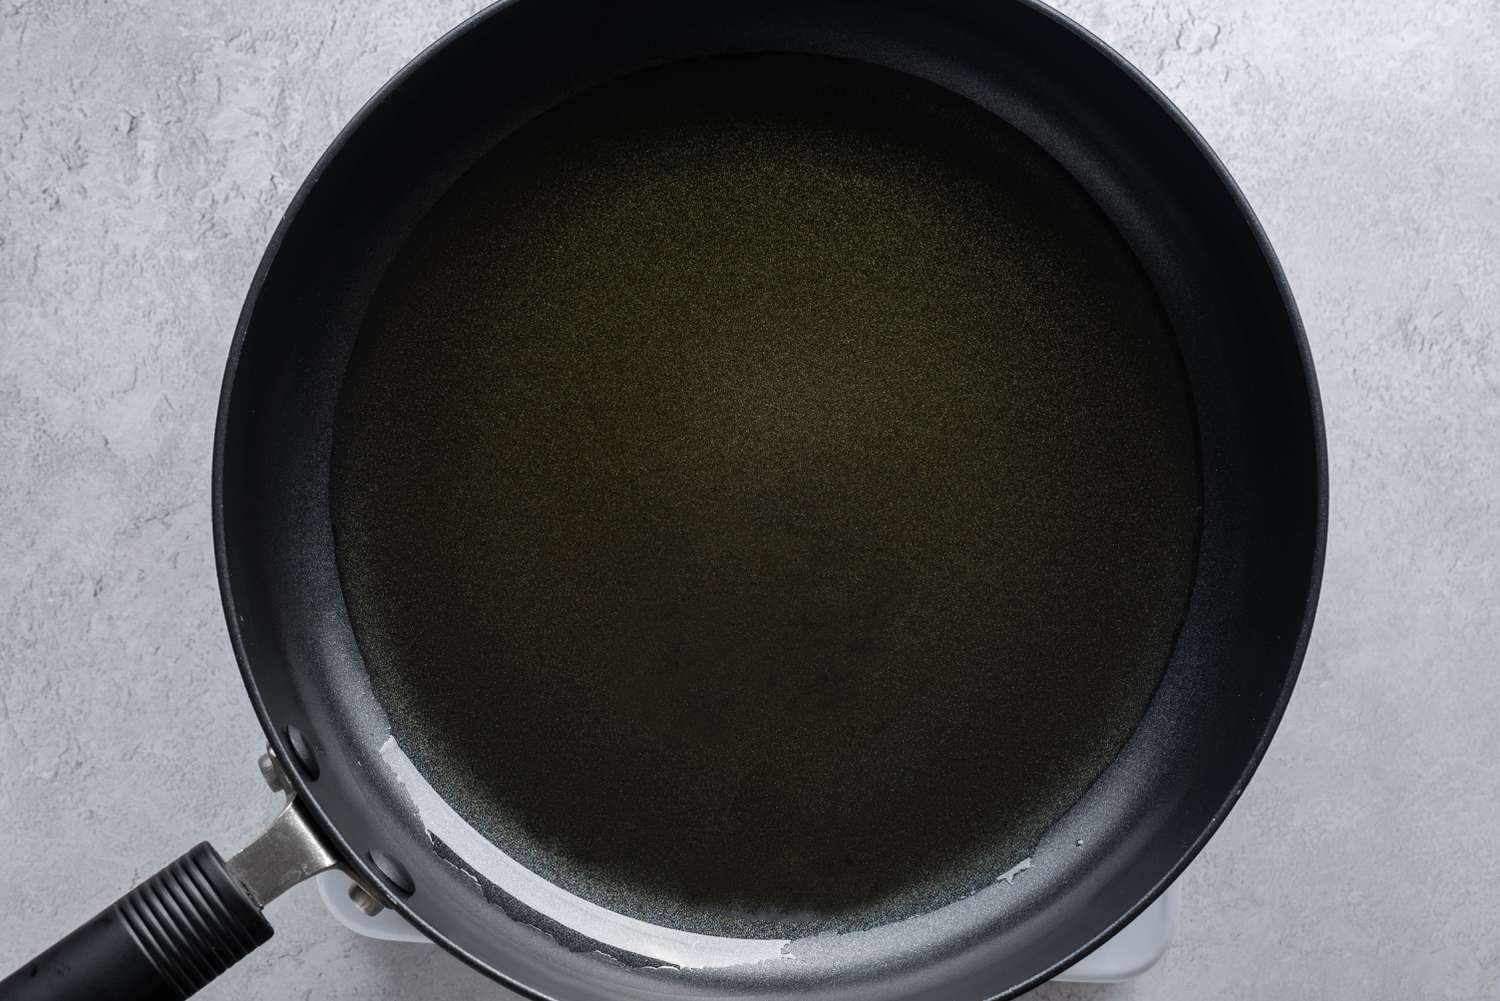 Olive oil heating in a skillet